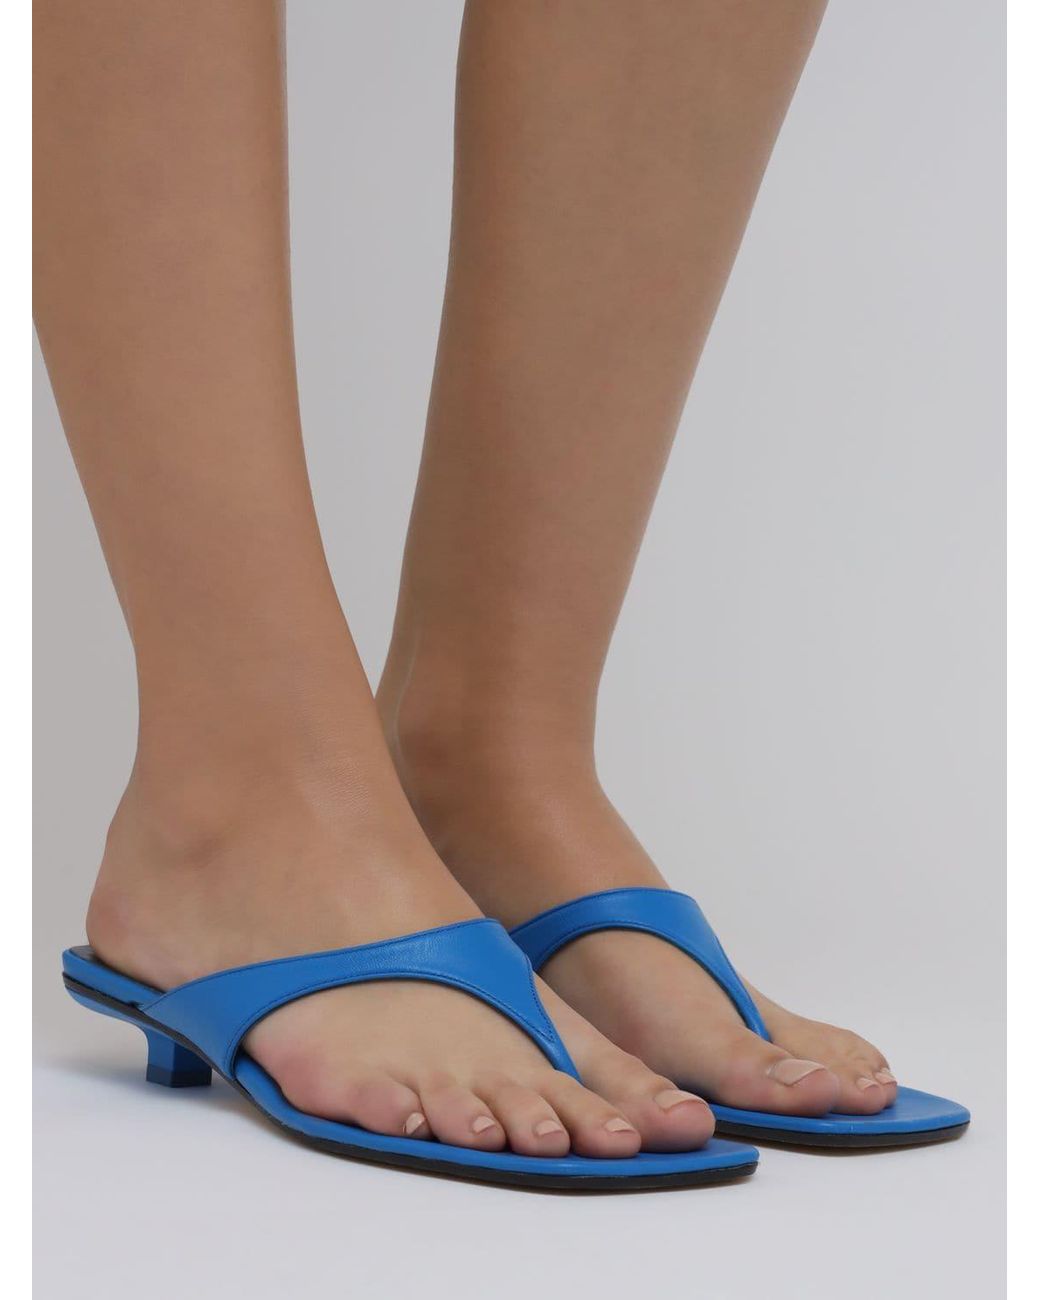 BY FAR 30mm Jack Leather Thong Sandals in Blue - Lyst